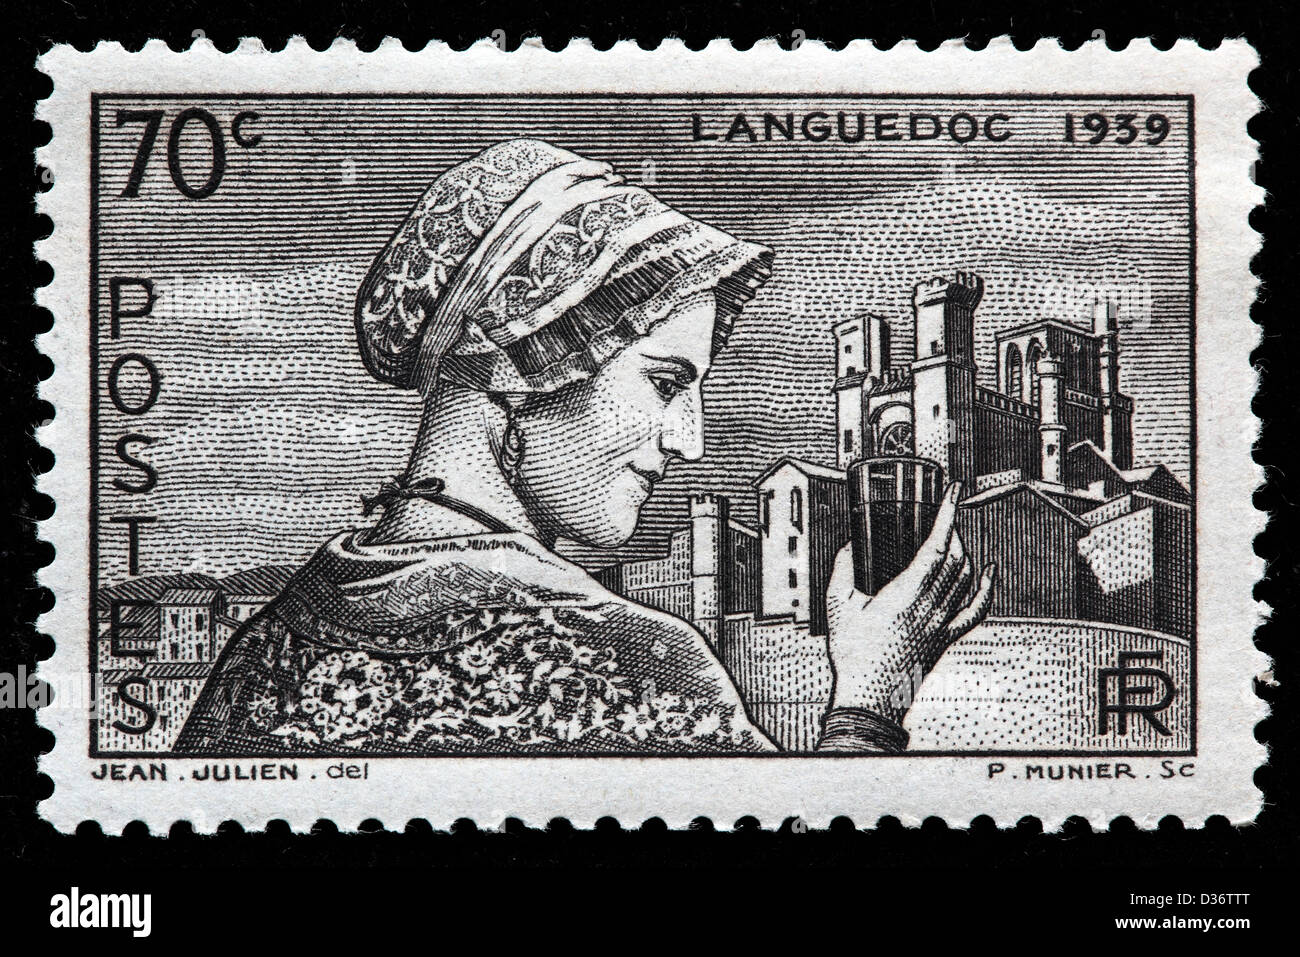 Maid of Languedoc, postage stamp, France, 1939 Stock Photo